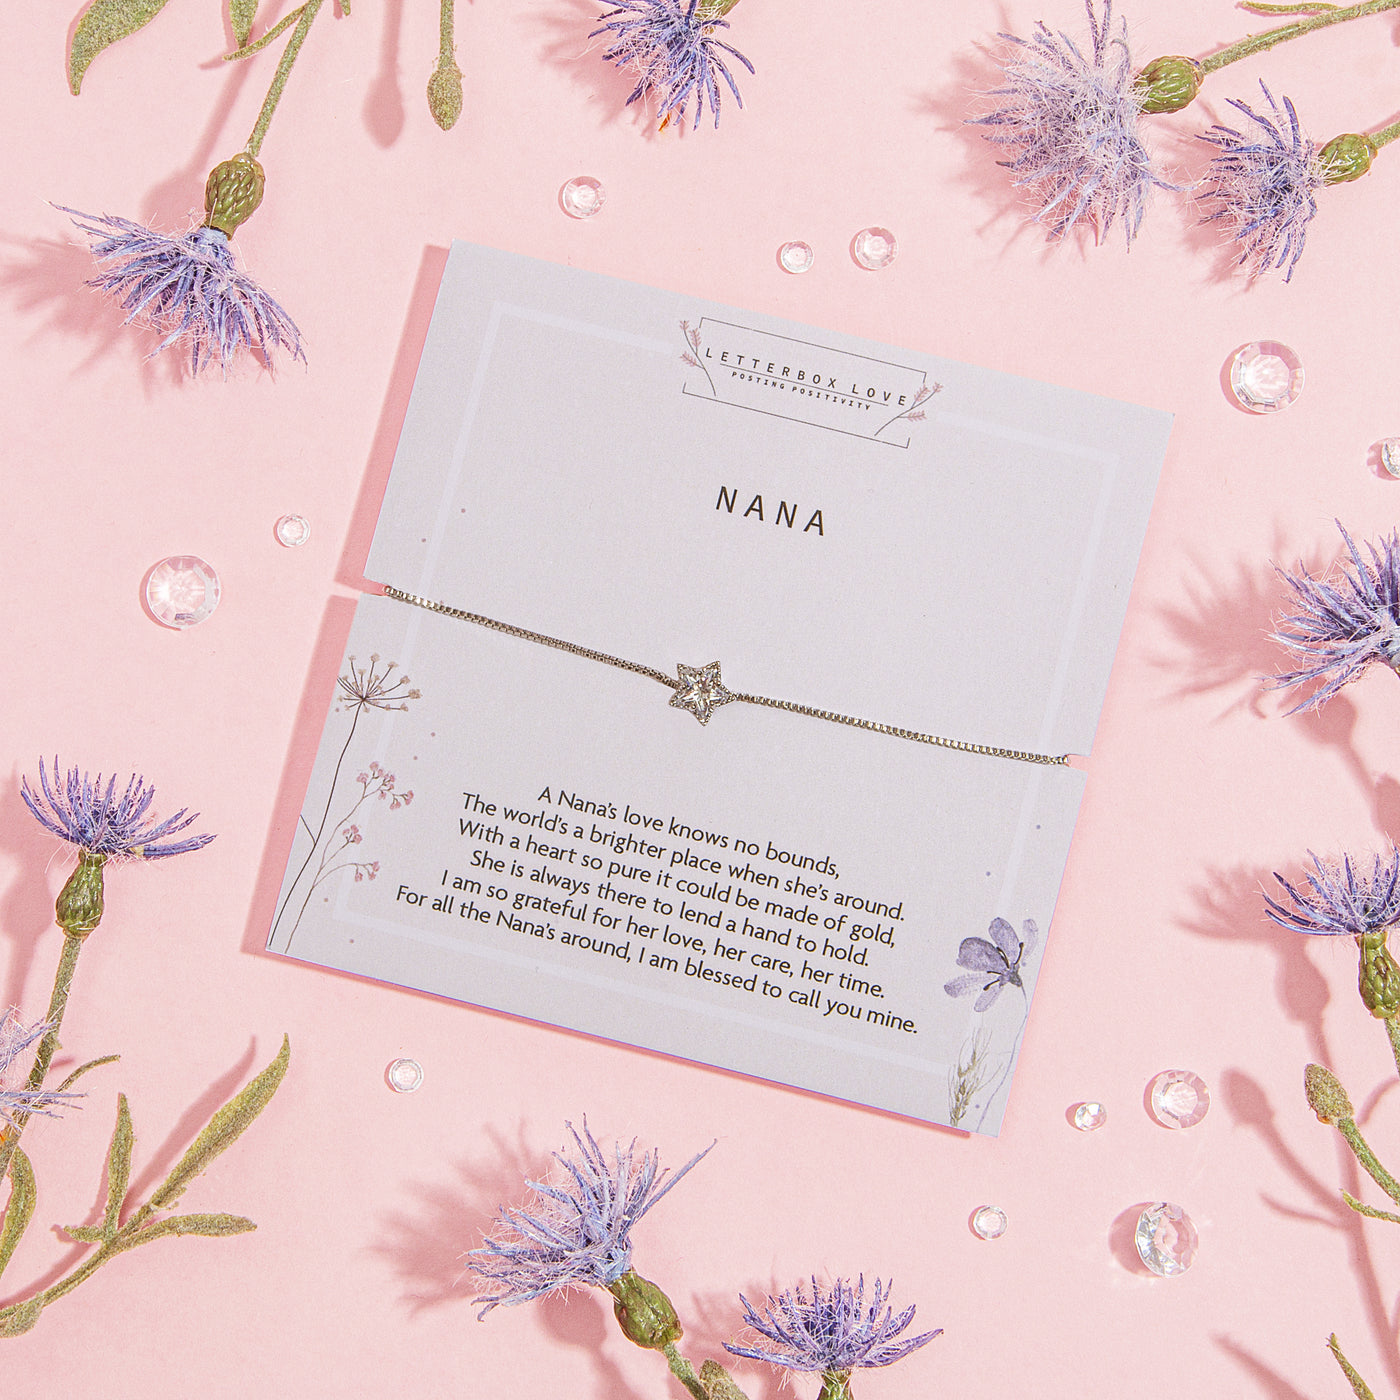 Special card titled 'NANA' with a heartfelt message celebrating a Nana's love, complemented by an elegant bracelet featuring a star charm. The card is presented on a soft pink background, decorated with sparkling droplets and vivid blue thistle-like blossoms.